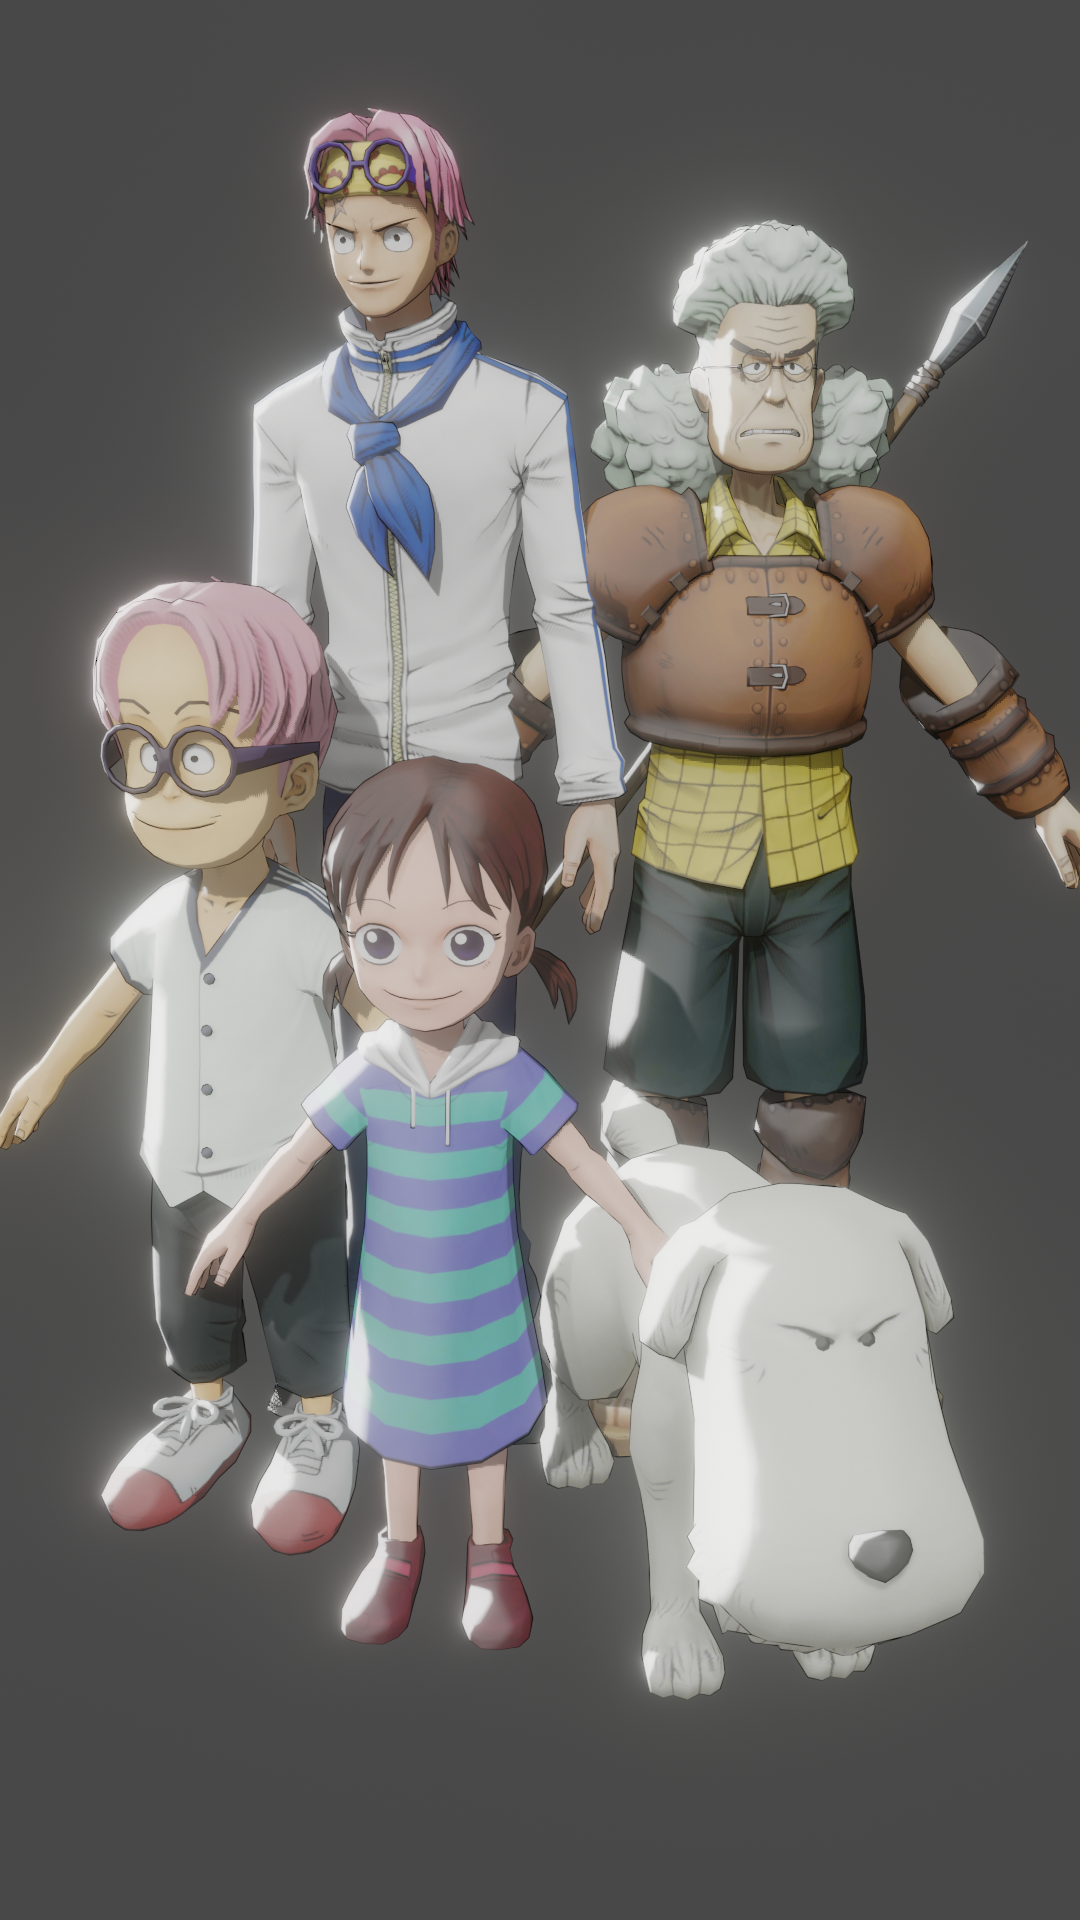 One Piece Water 7 pack XPS/FBX by o-DV89-o on DeviantArt